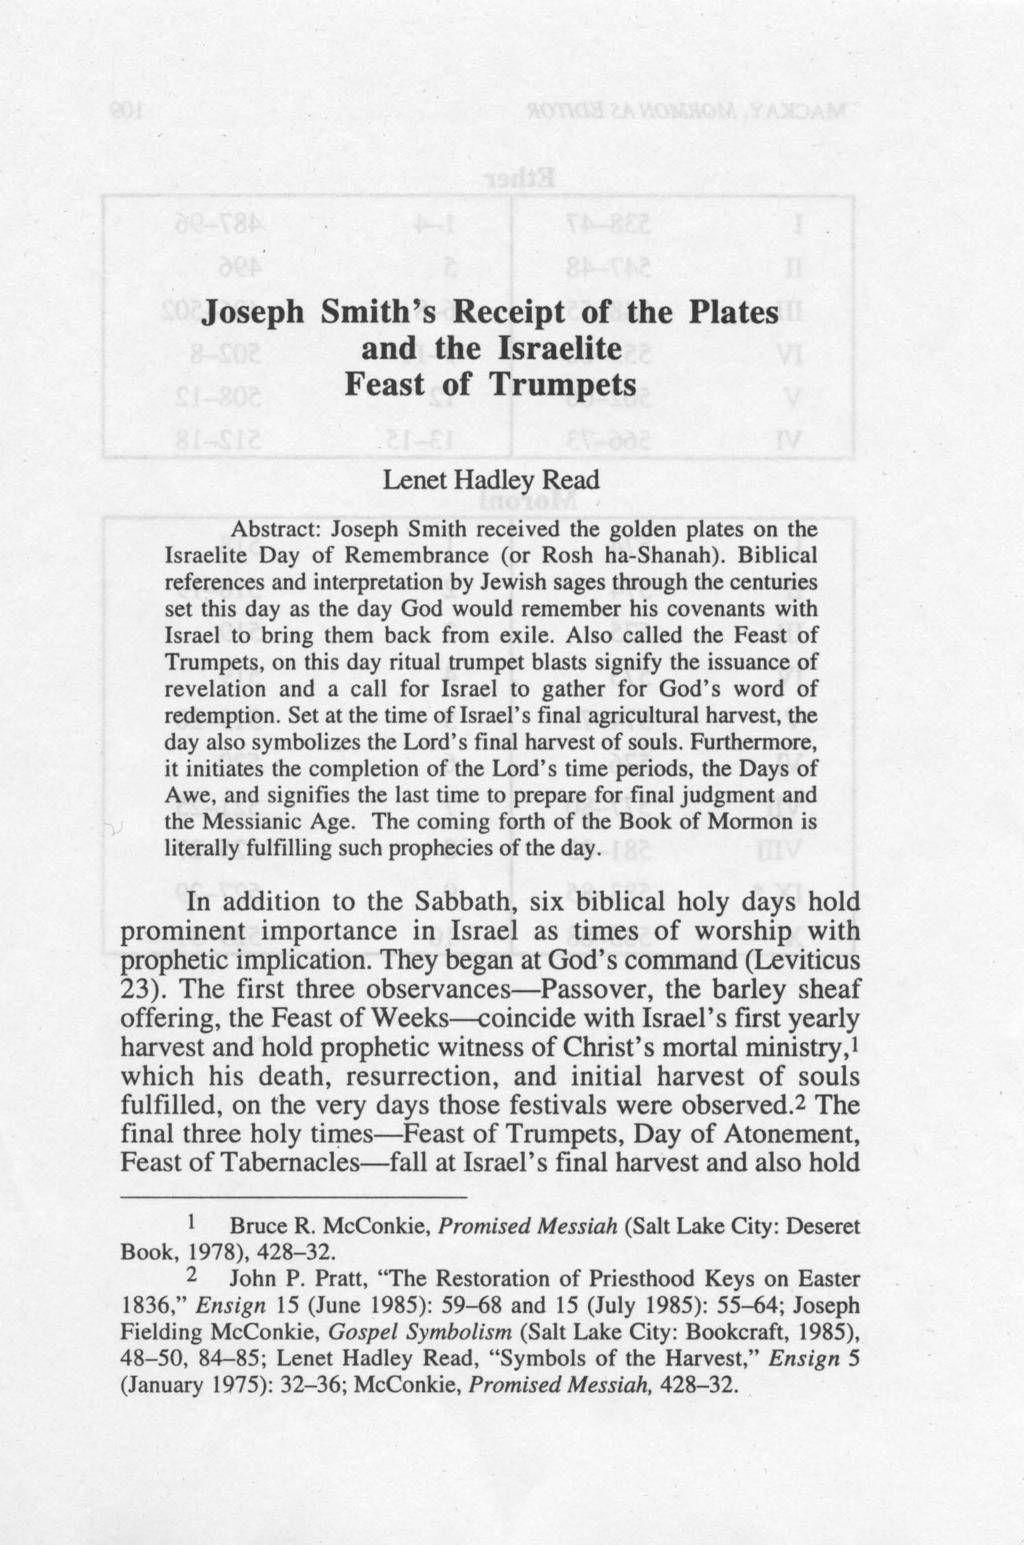 Joseph Smith's Receipt of the Plates and the Israelite Feast of Trumpets Lenet Hadley Read Abstract: Joseph Smith received the golden plates on the Israelite Day of Remembrance (or Rosh ha-shanah).